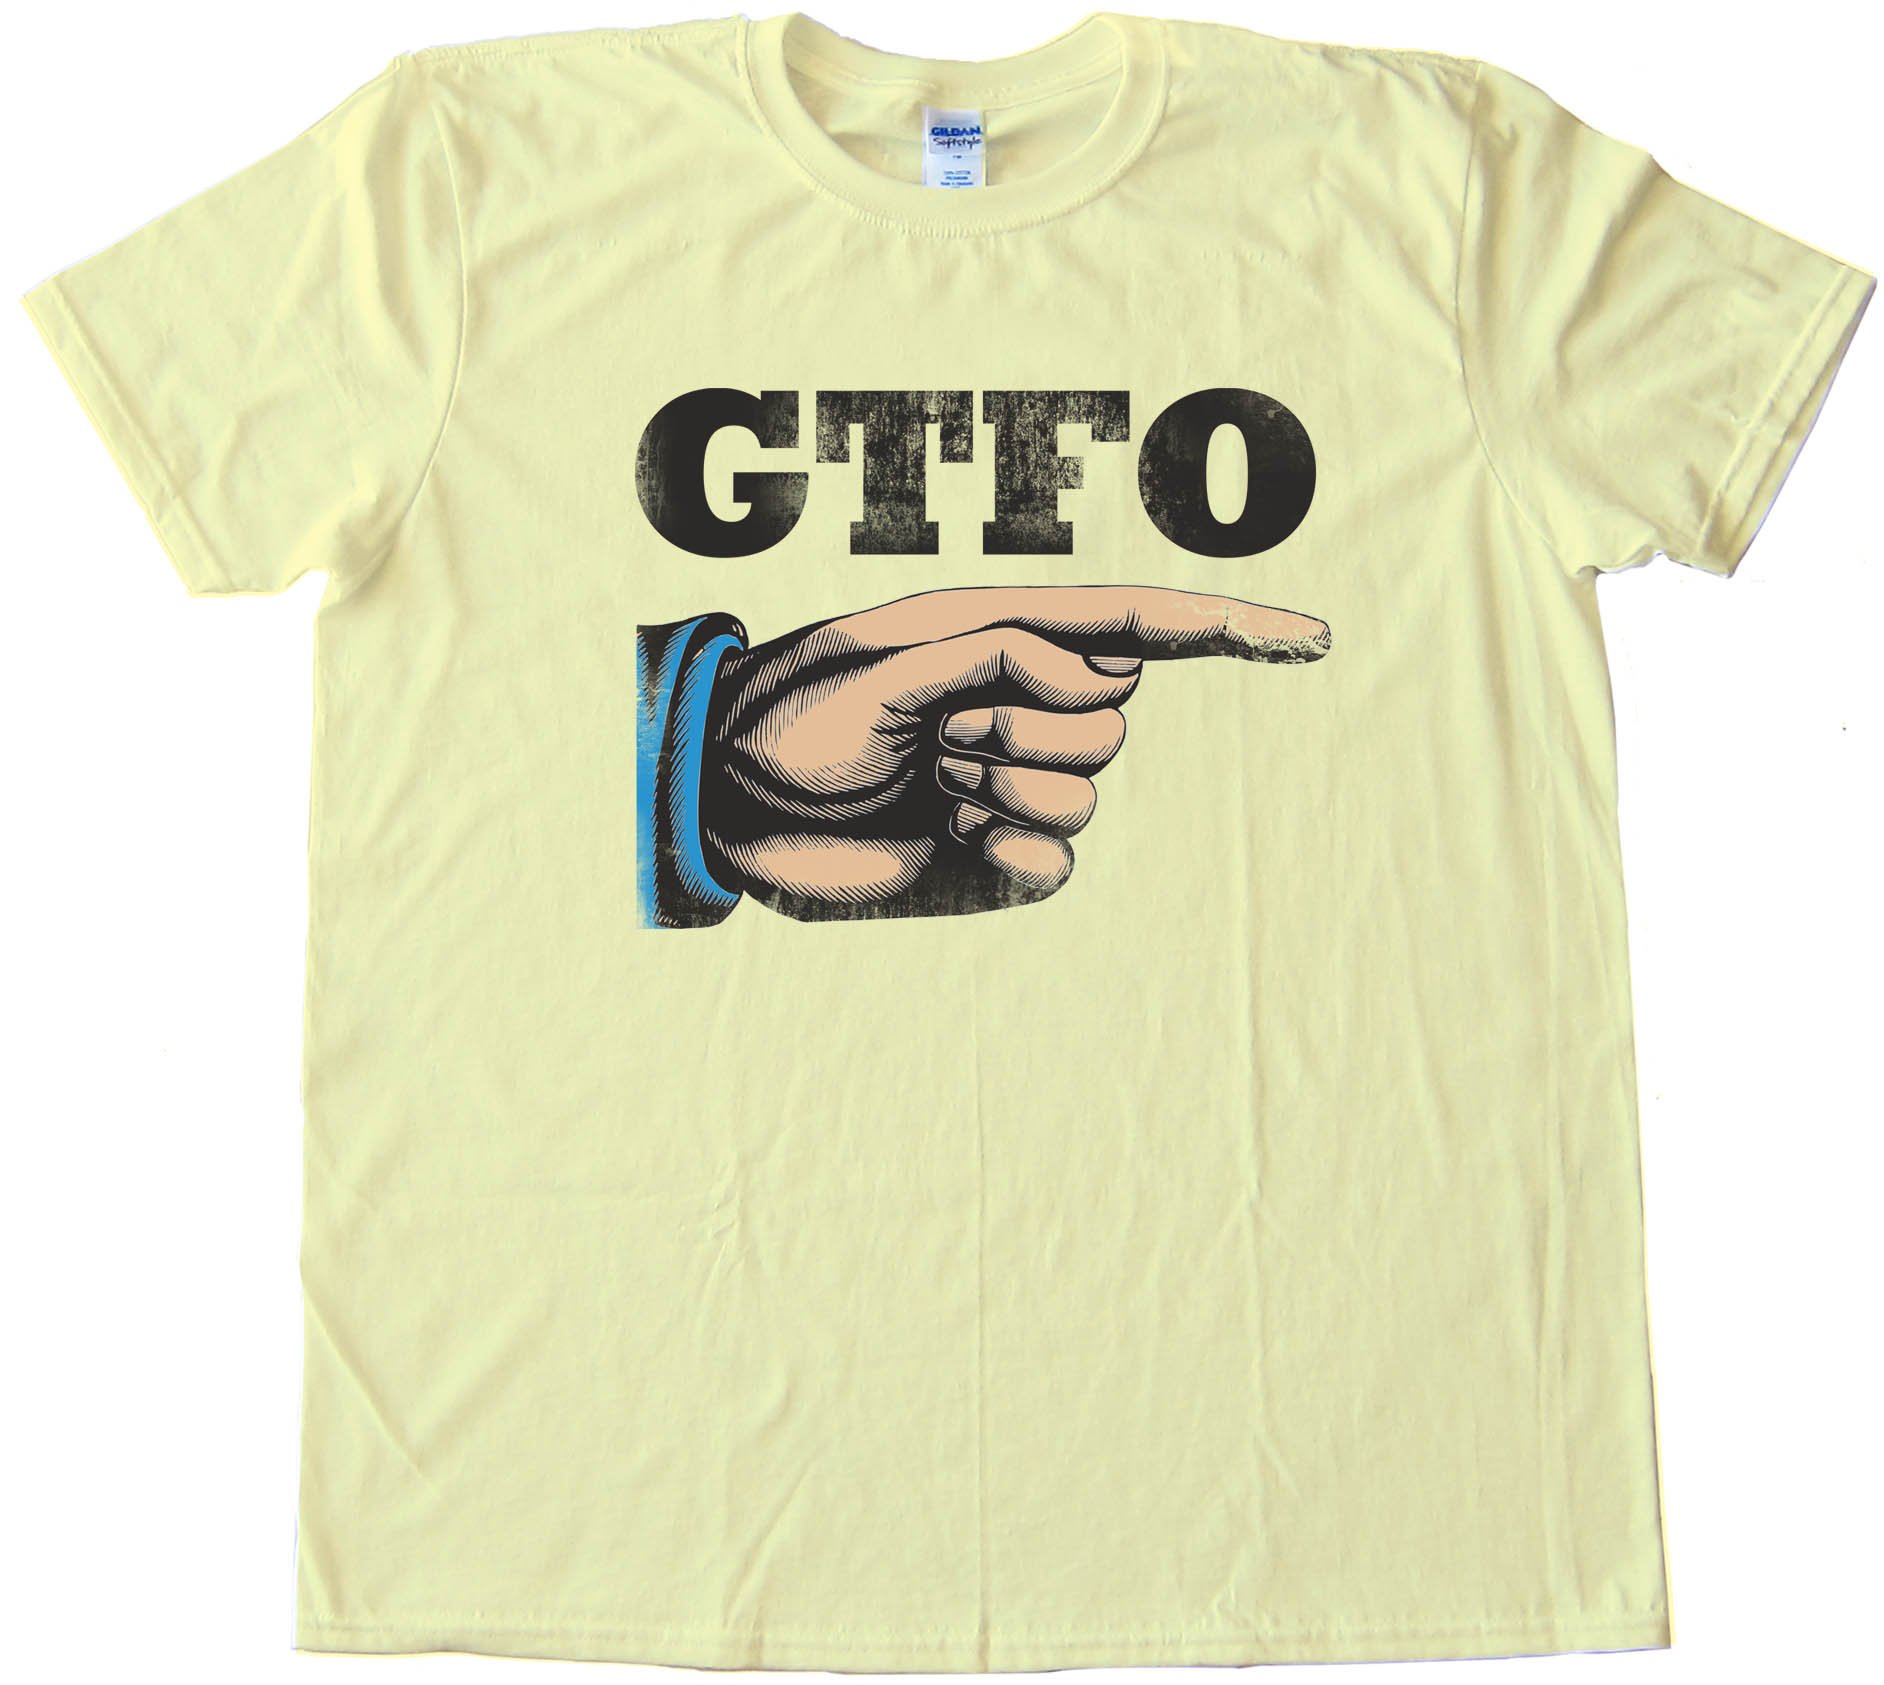 Retro Gtfo Hand - Get The F&Amp;*# Out - Tee Shirt